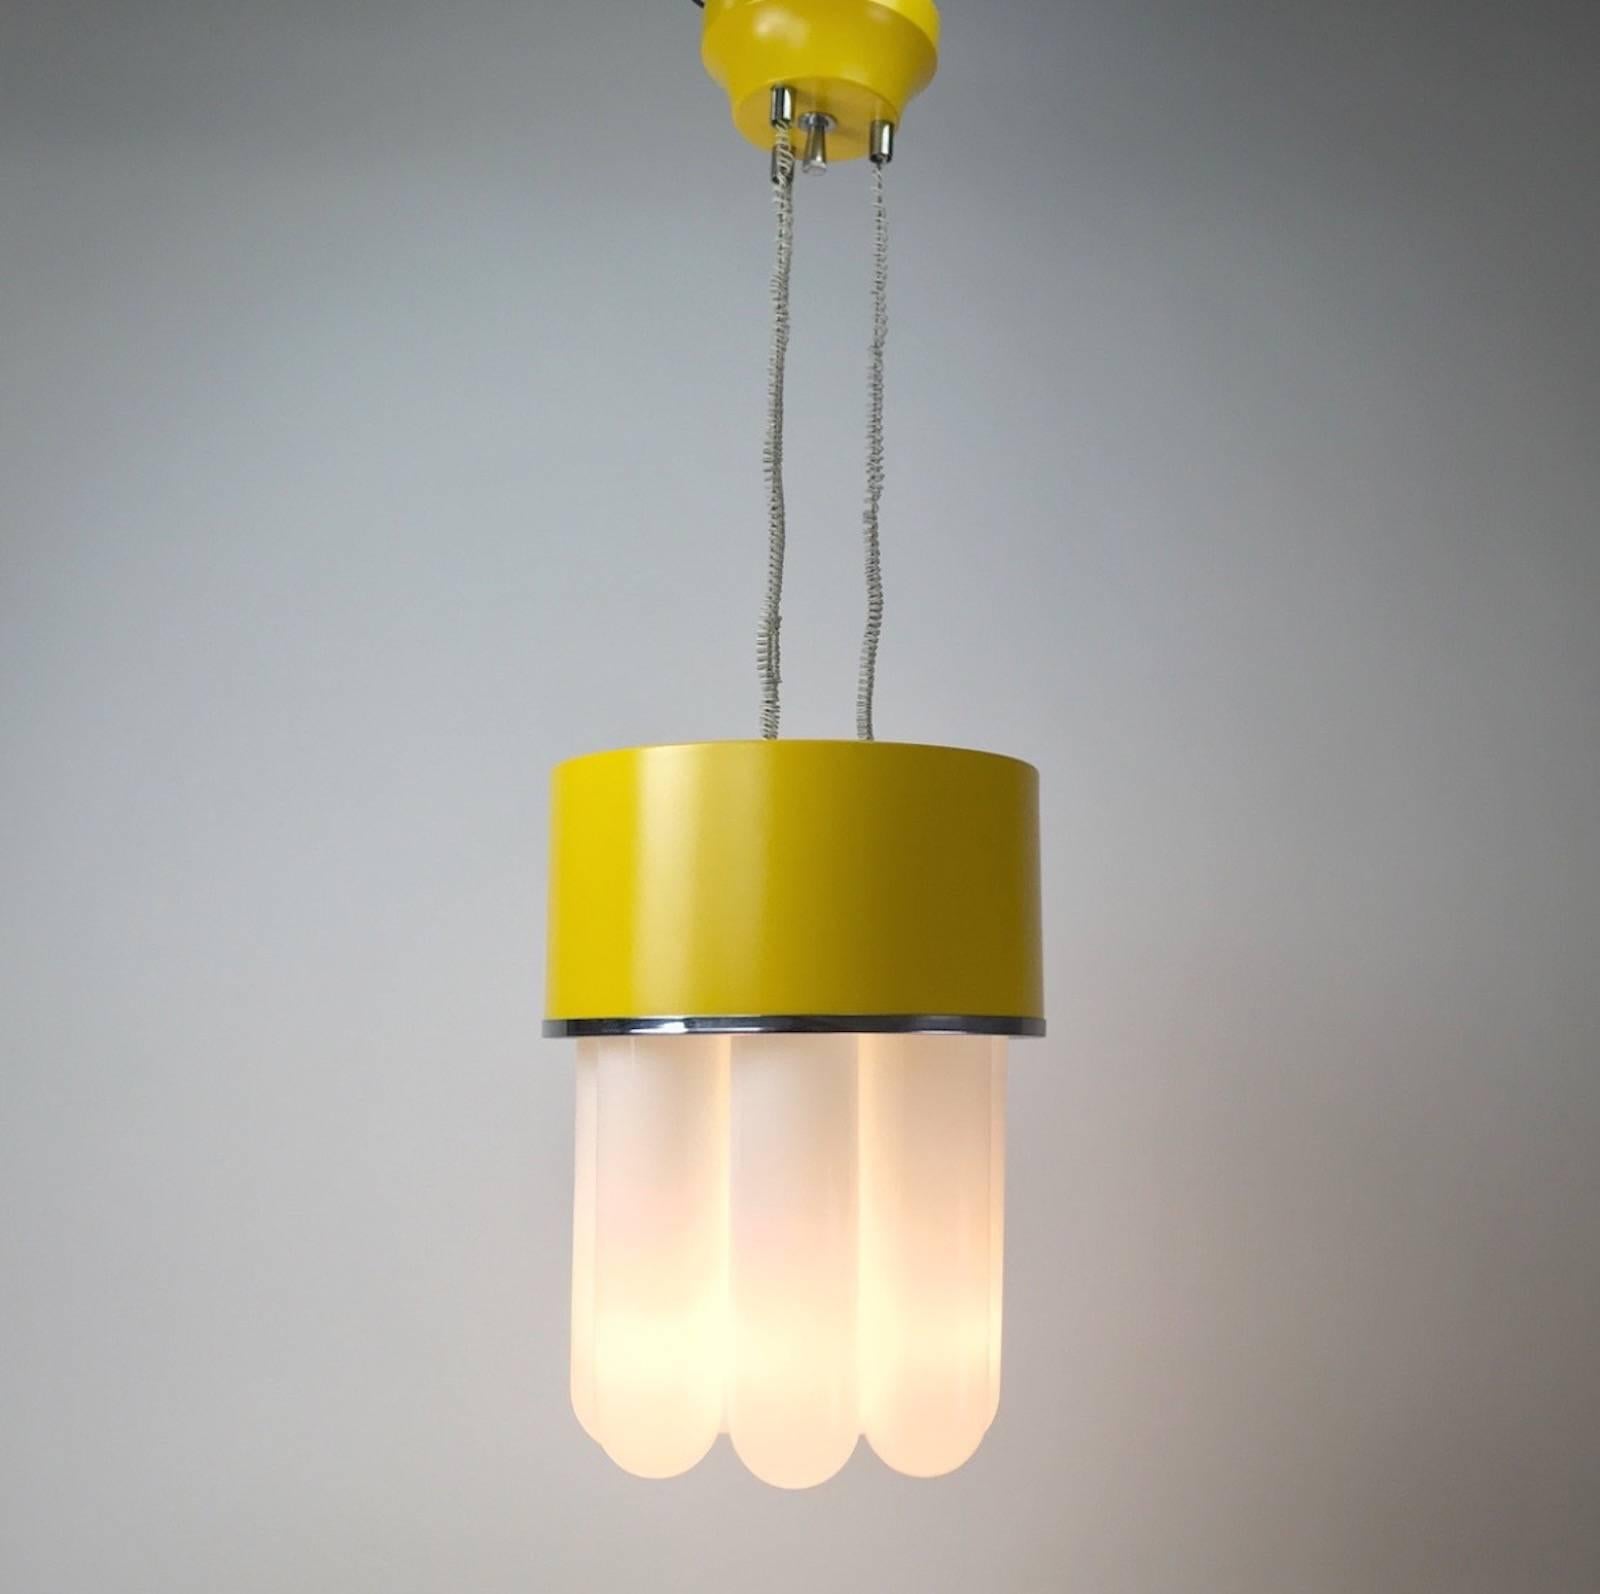 Mid-Century Modern Unique Italian Design Chandelier from the Late 1960